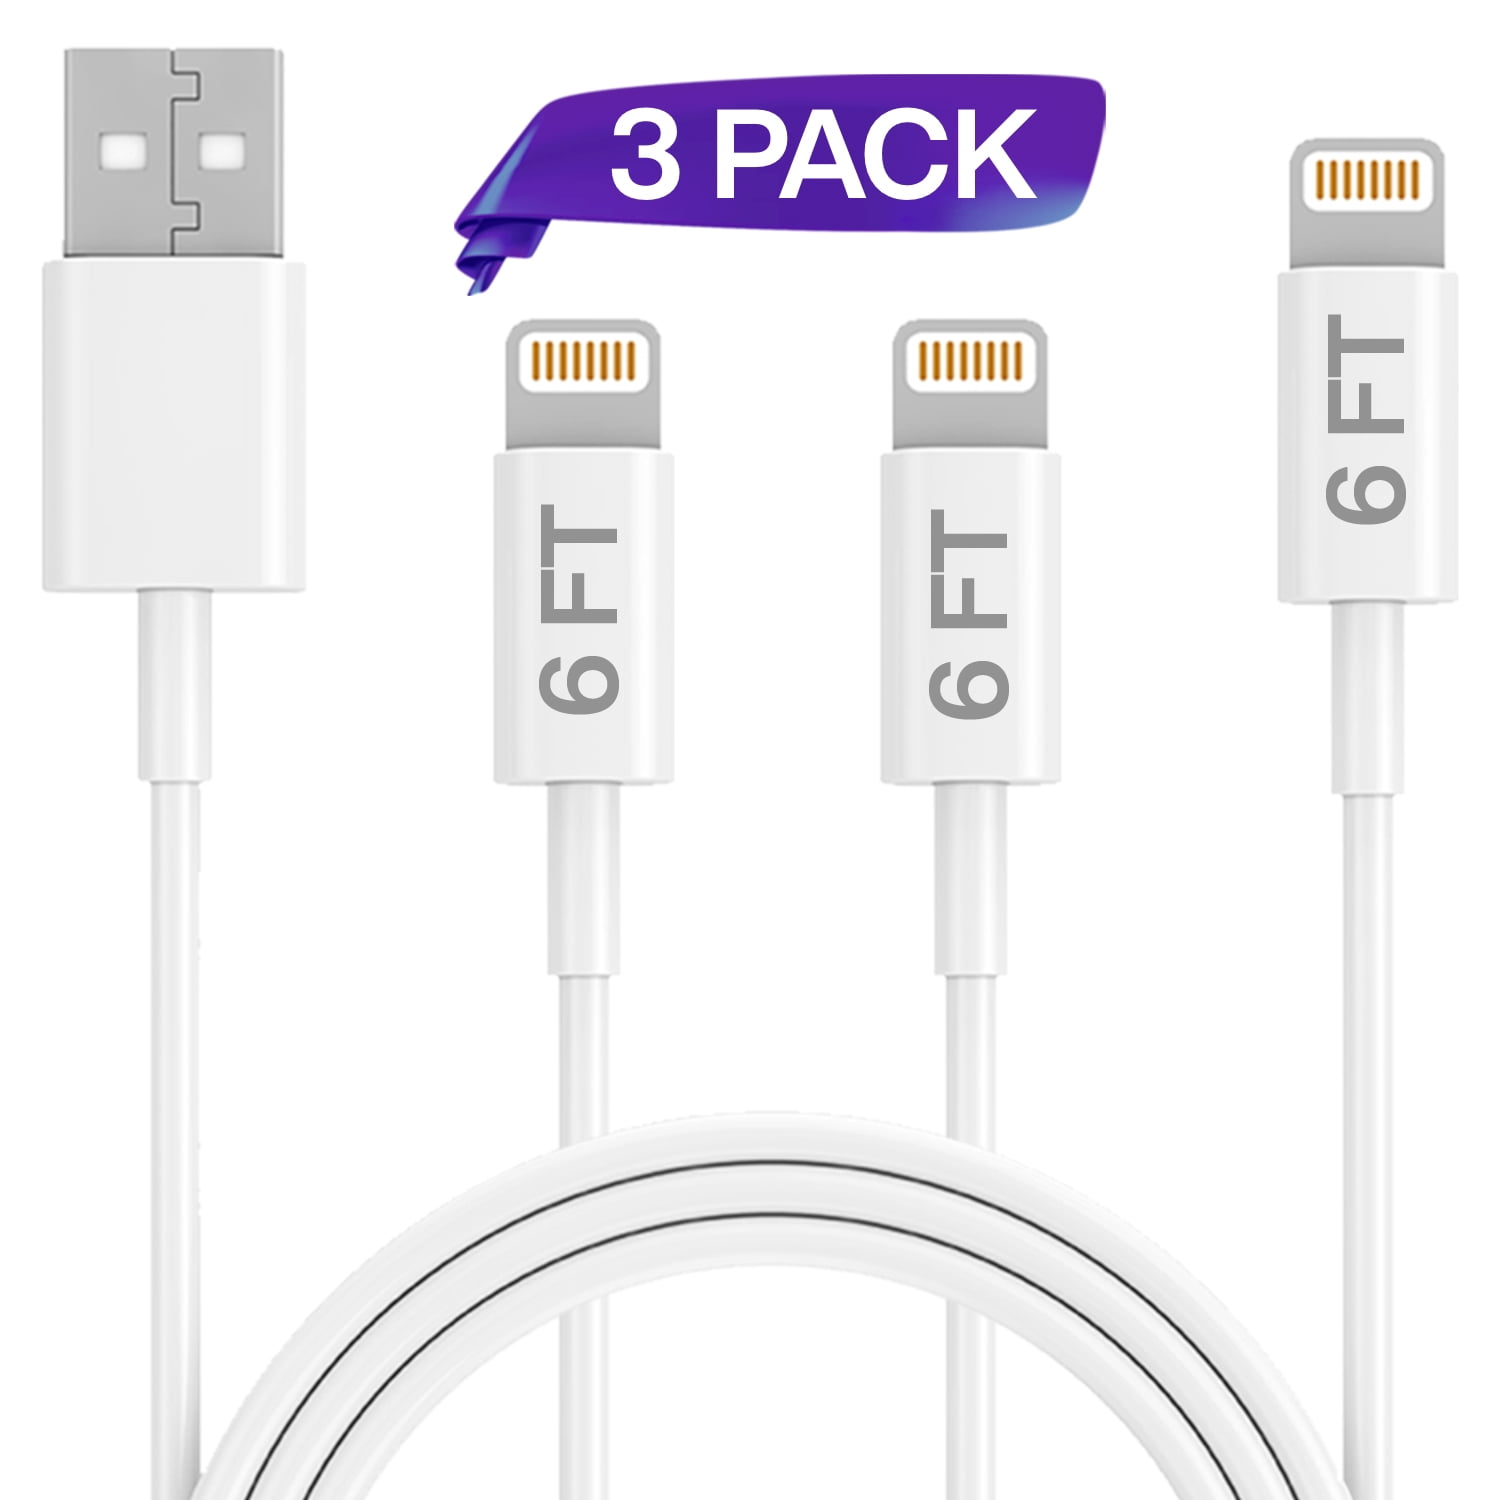 Black 3-Pack iPhone Charger 10 ft,Extra Long Lightning Cable MFi-Certified iPhone Charger Cable 10 Foot Charging Cord for iPhone 12 11 Pro X XS Max XR/8 Plus/7 Plus/6/6s Plus/5s /5c/iPad Mini Air